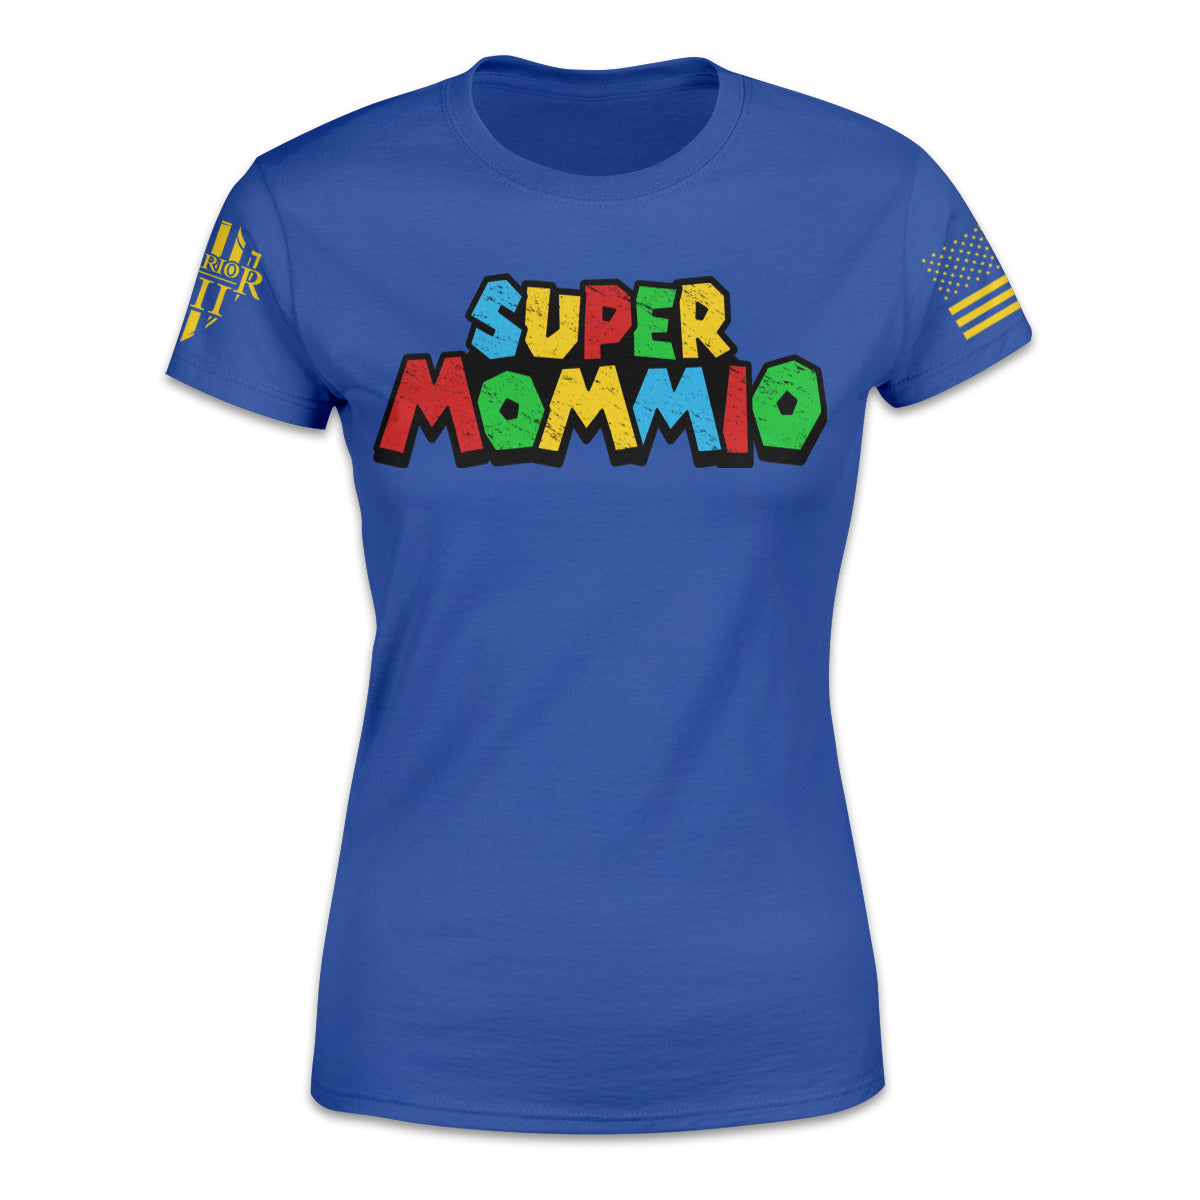 A blue women's t-shirt with the words "Super Mommio" on the front in colorful font